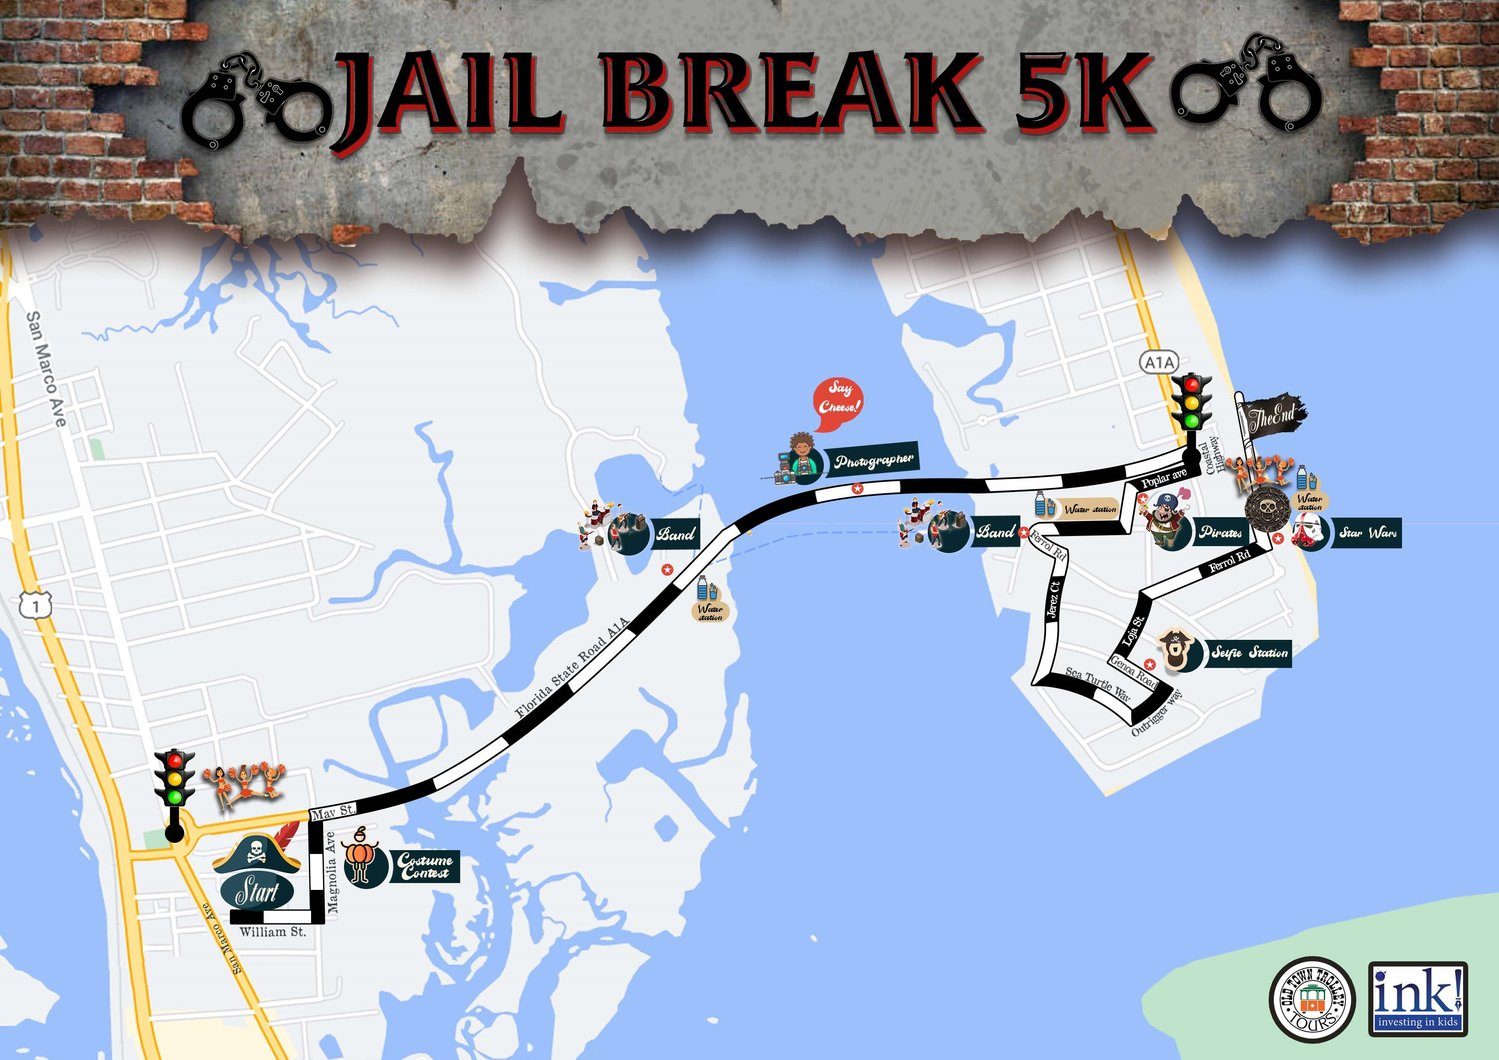 The route for the 6th Annual Jail Break 5K.